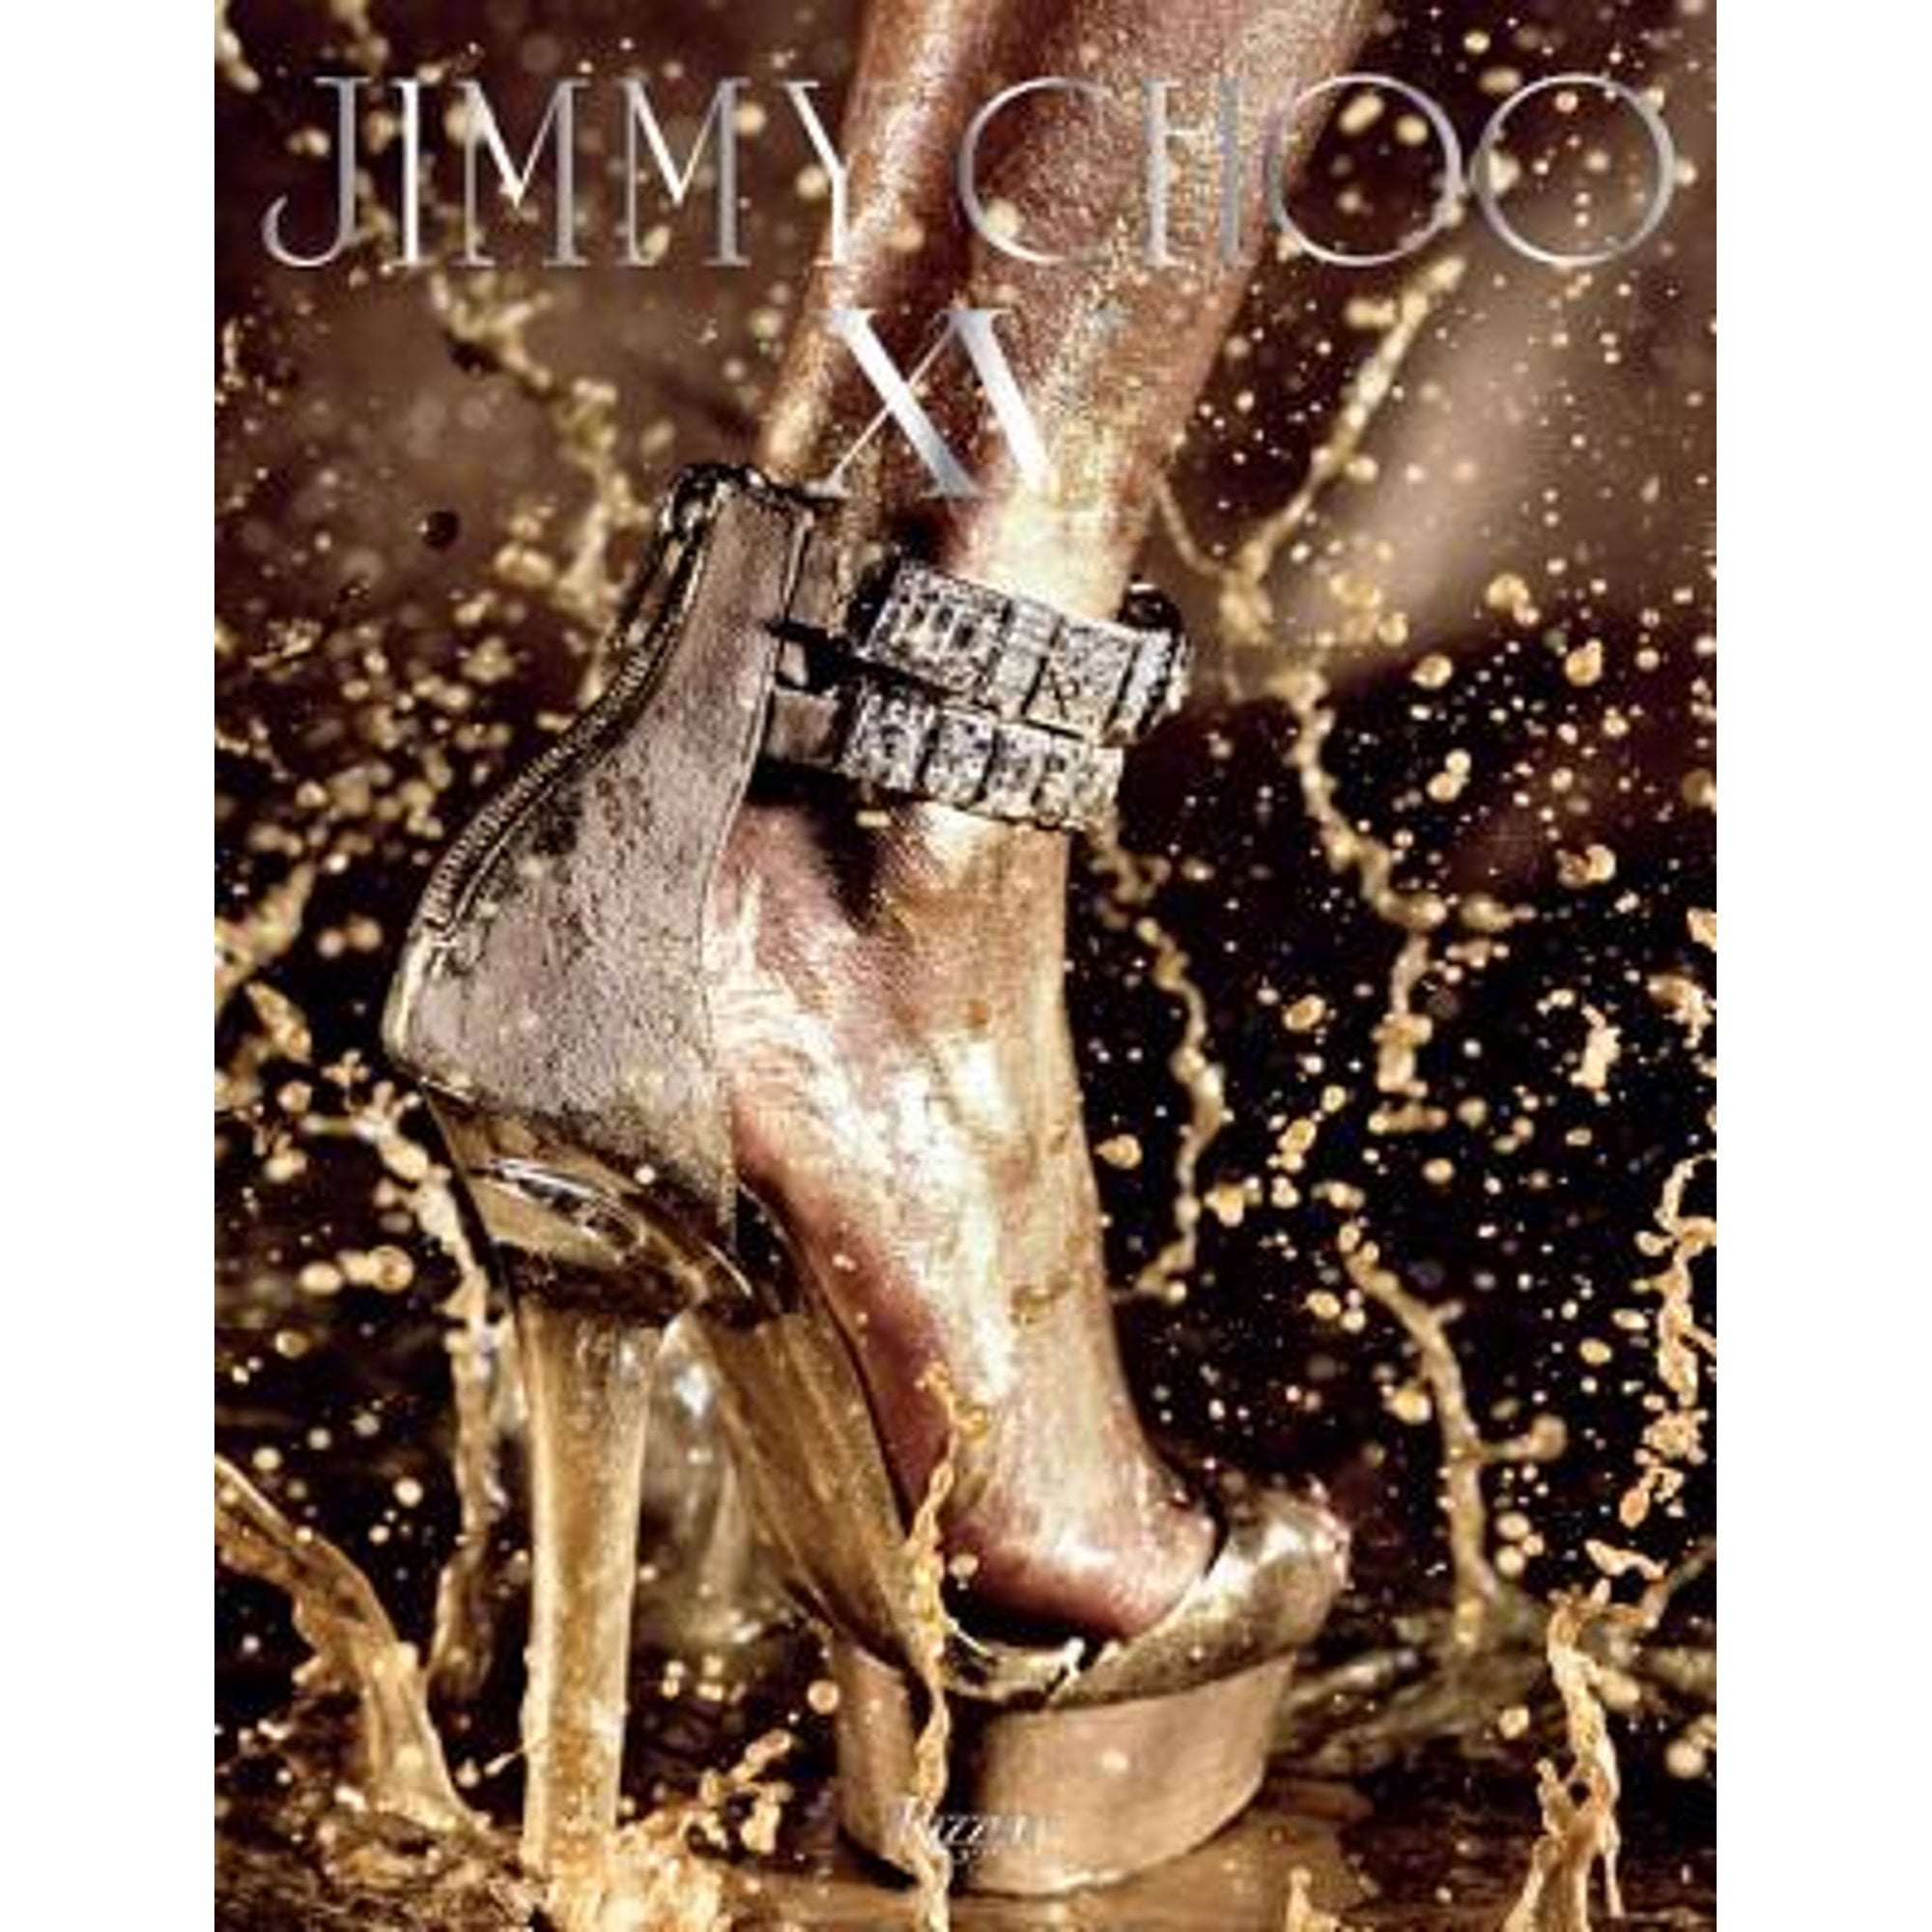 Pre-Owned Jimmy Choo: Icons (Hardcover 9780847837489) by Tamara Mellon